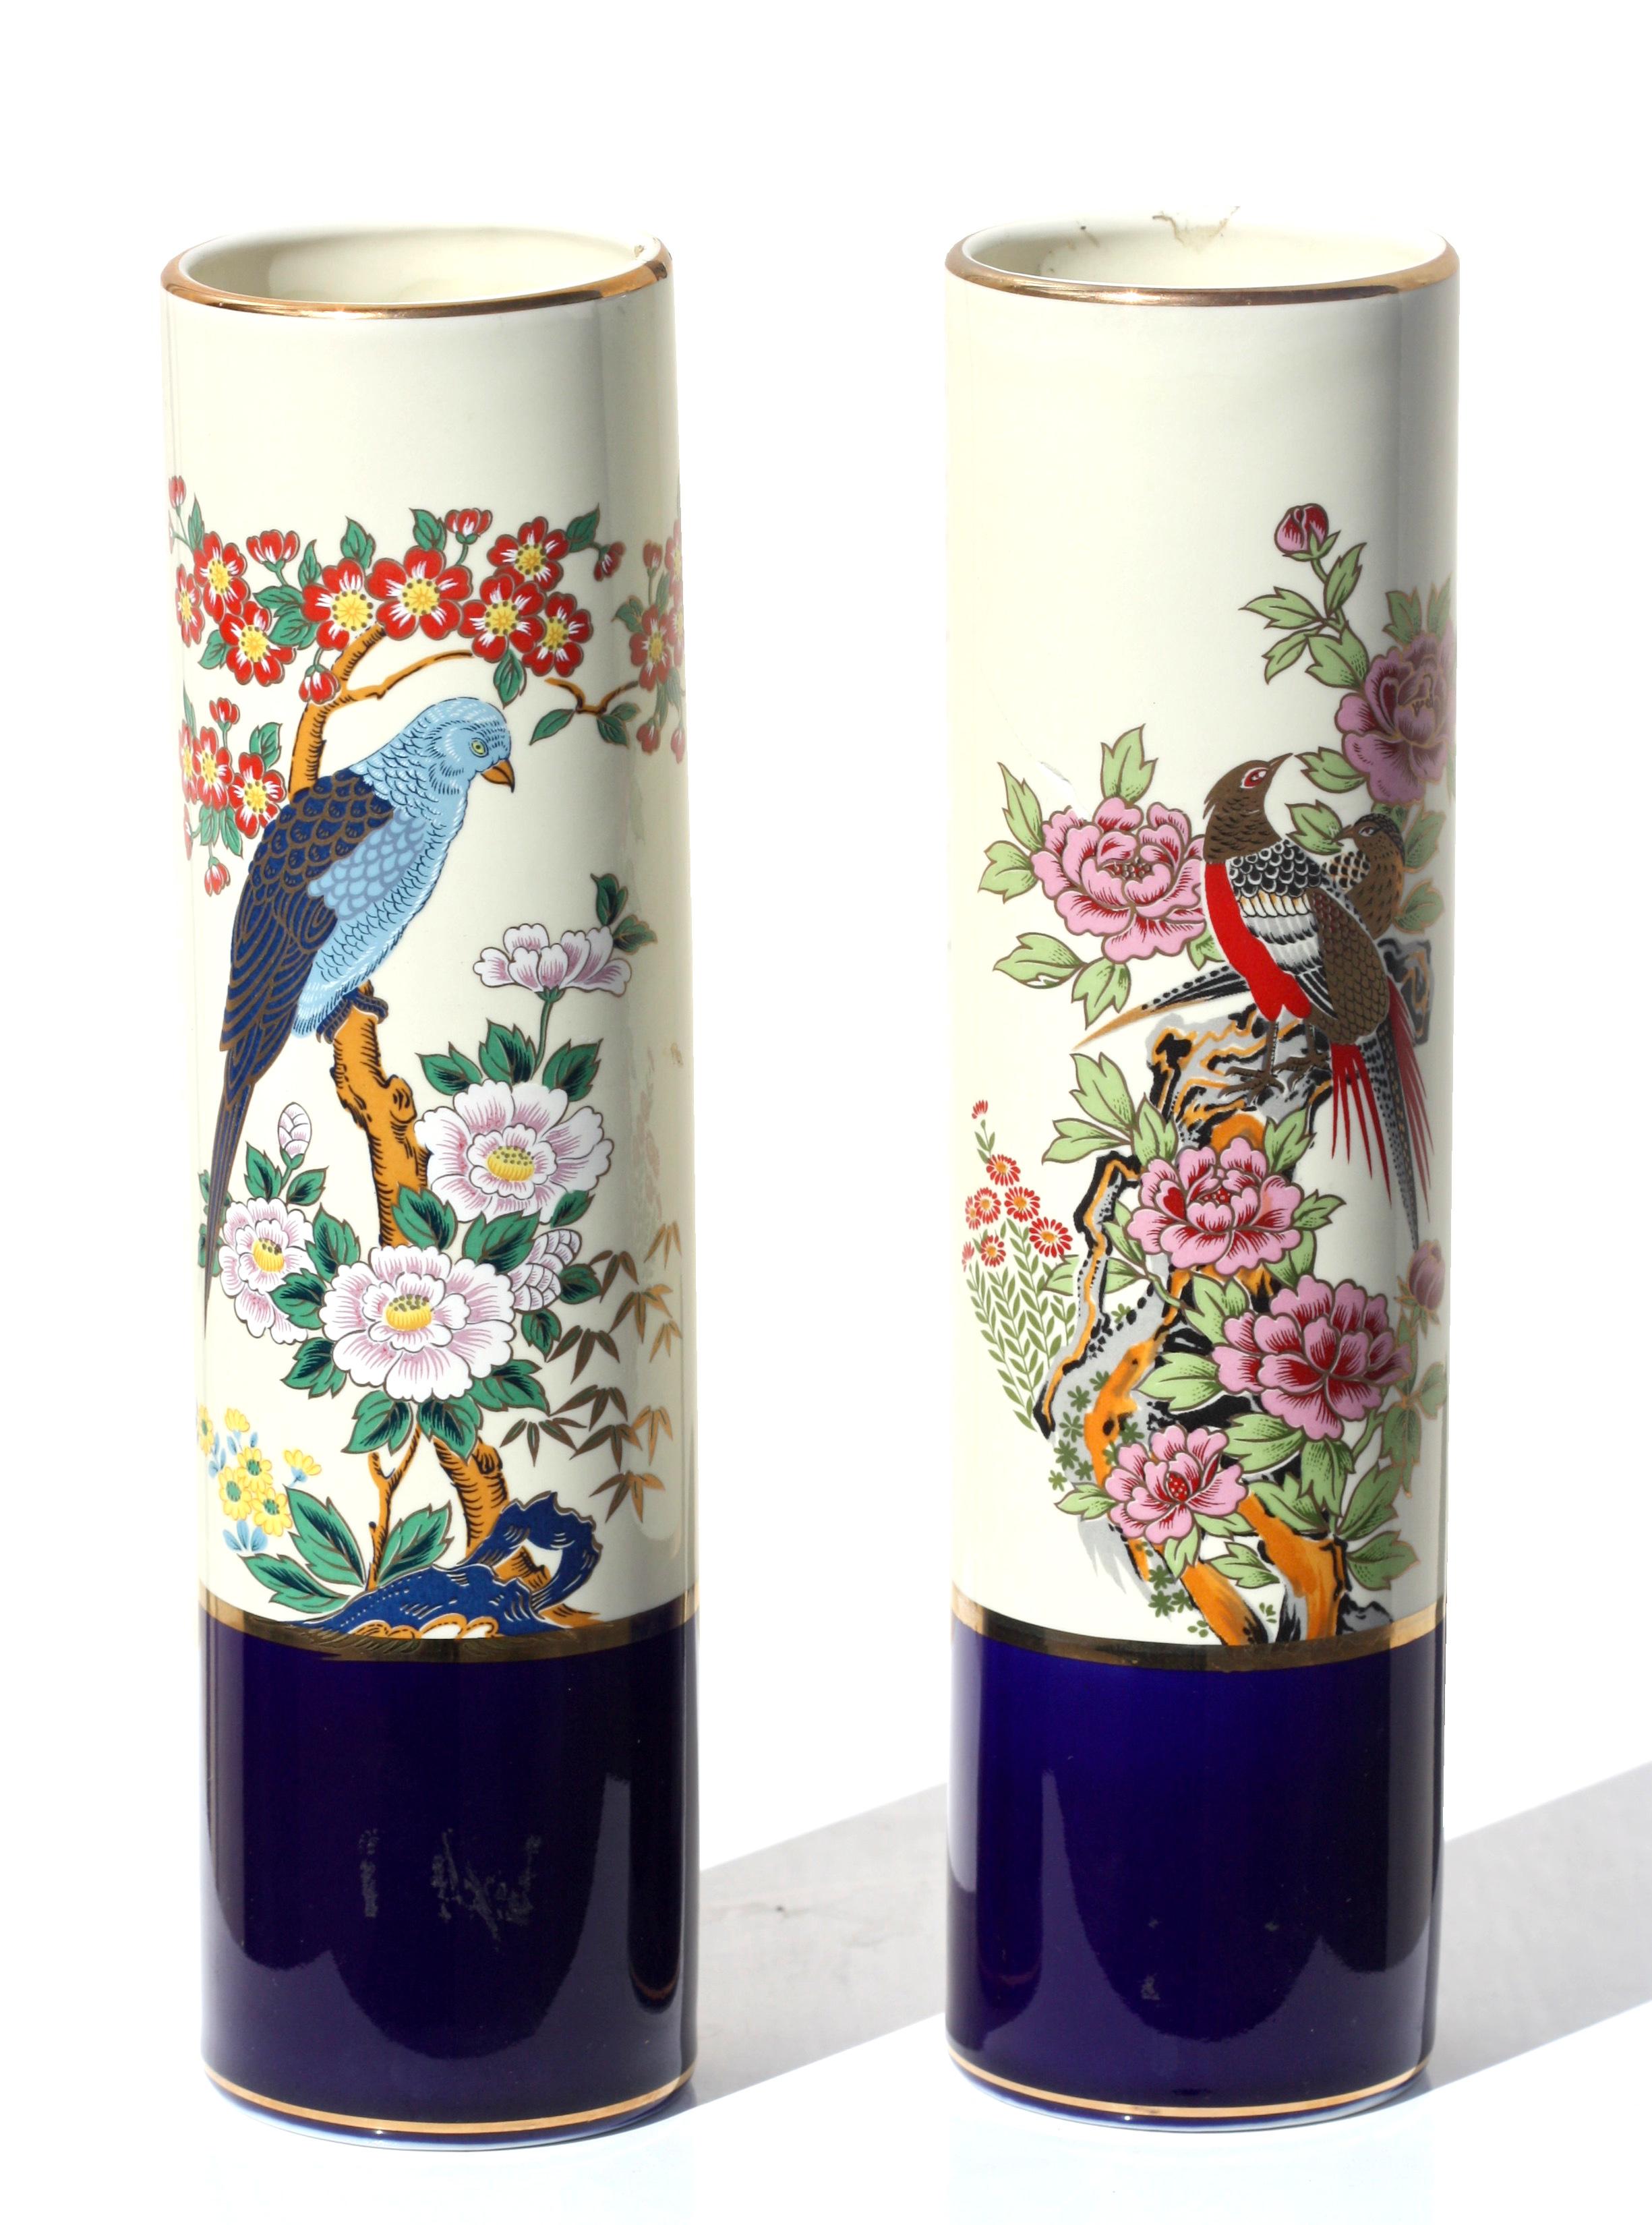 A pair of Japanese Kutani style porcelain cylindrical vases
painted with birds on flowering branches, with borders of gilt on a spotted cream ground, marked on the underside JAPAN
Height 10 1/4 in.
26 cm
Diameter 2 1/2 inches.